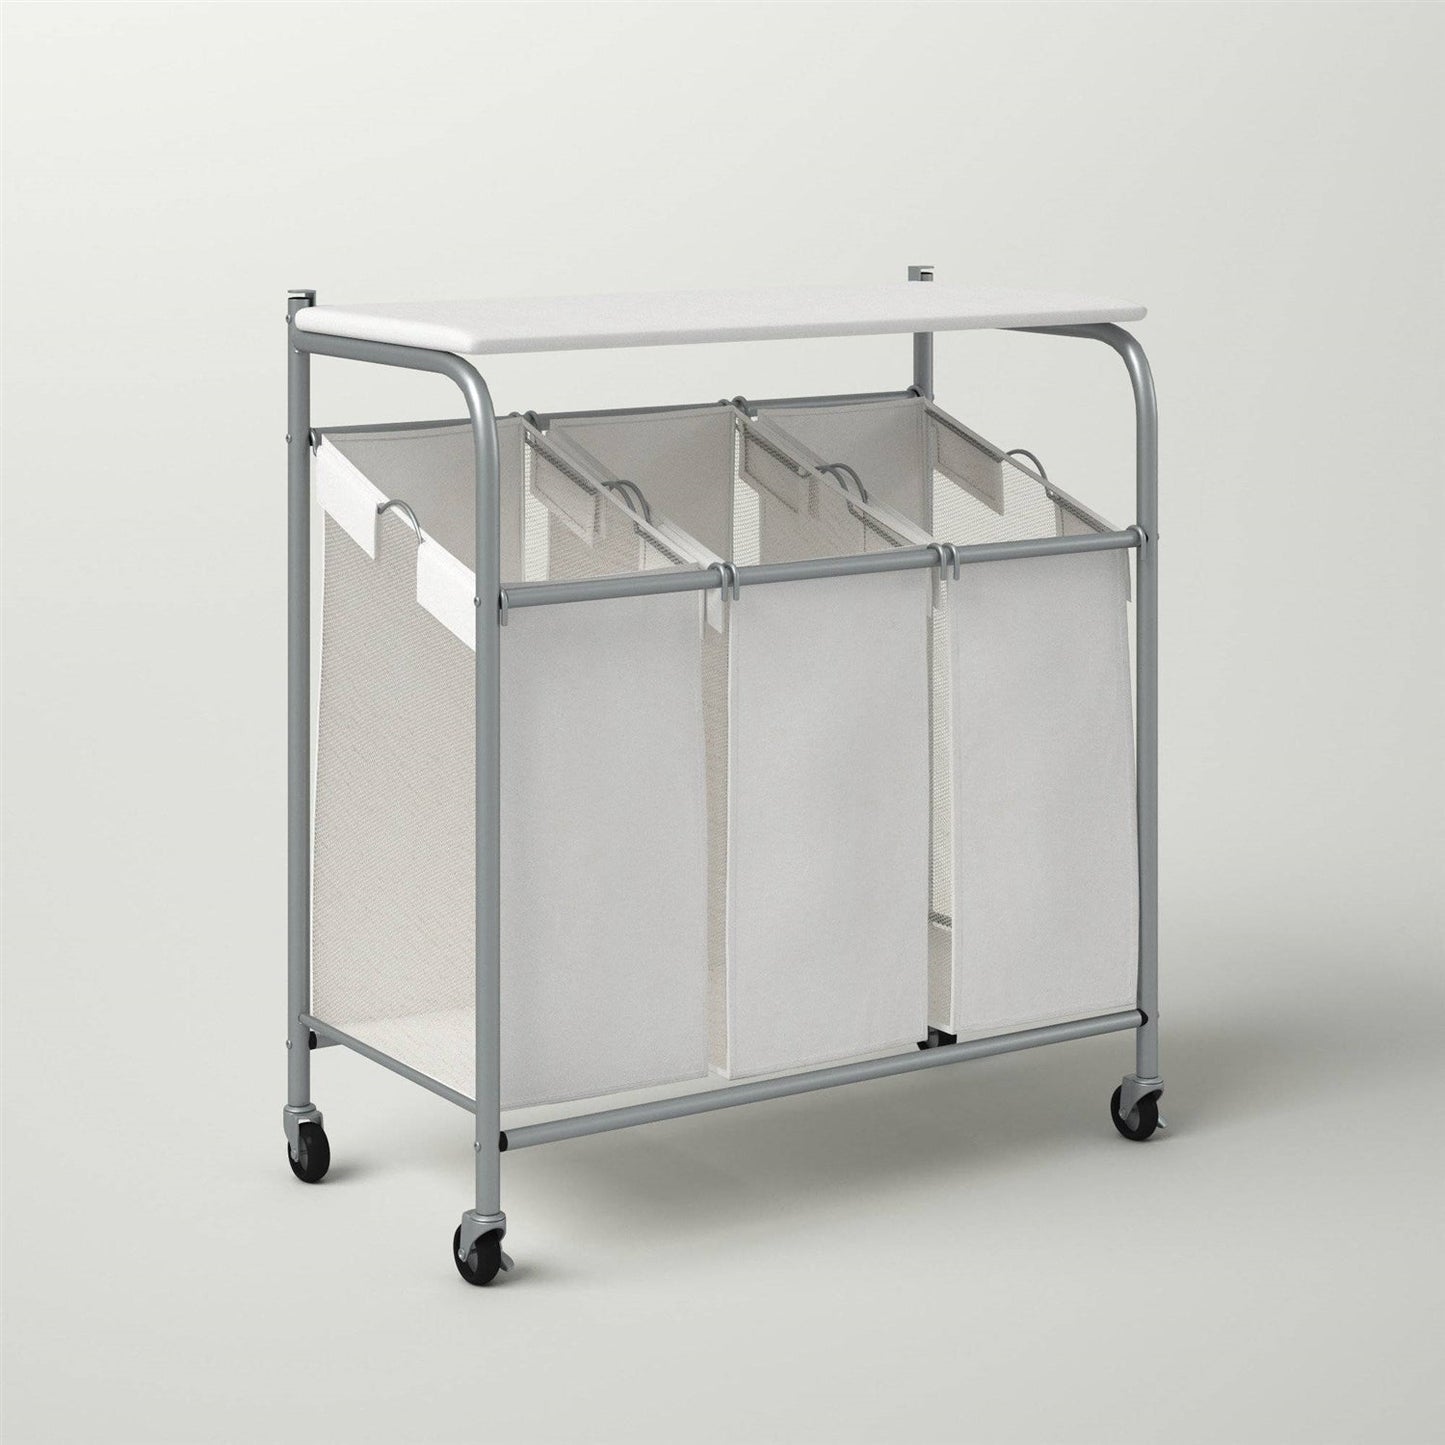 Bathroom > Laundry Hampers - 3 Section Wheeled Laundry Sorter Cart With Lift Top Folding Ironing Board